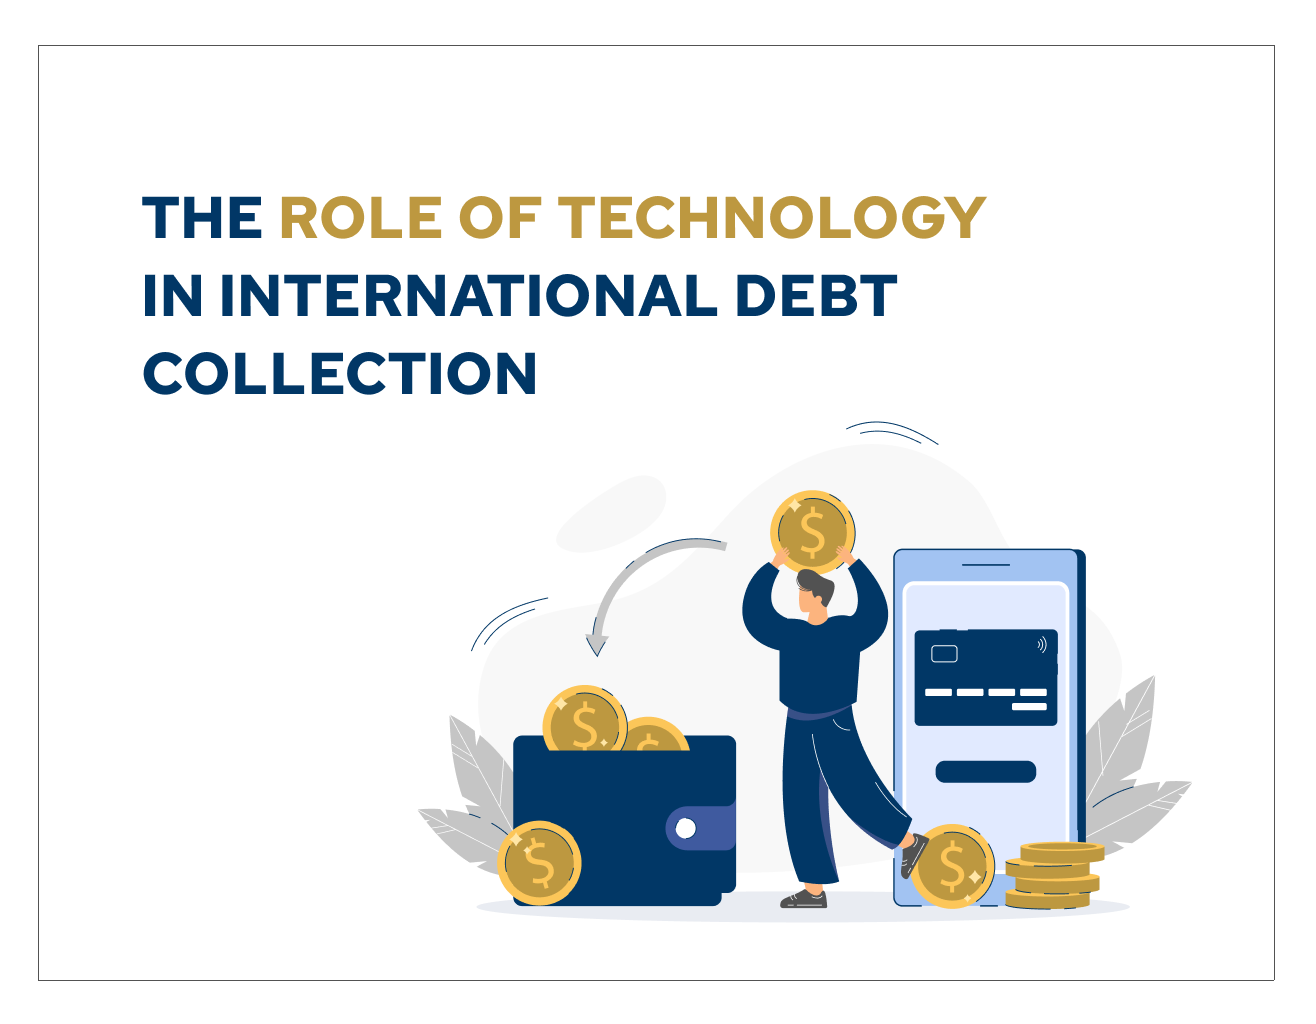 The role of technology in International debt collection